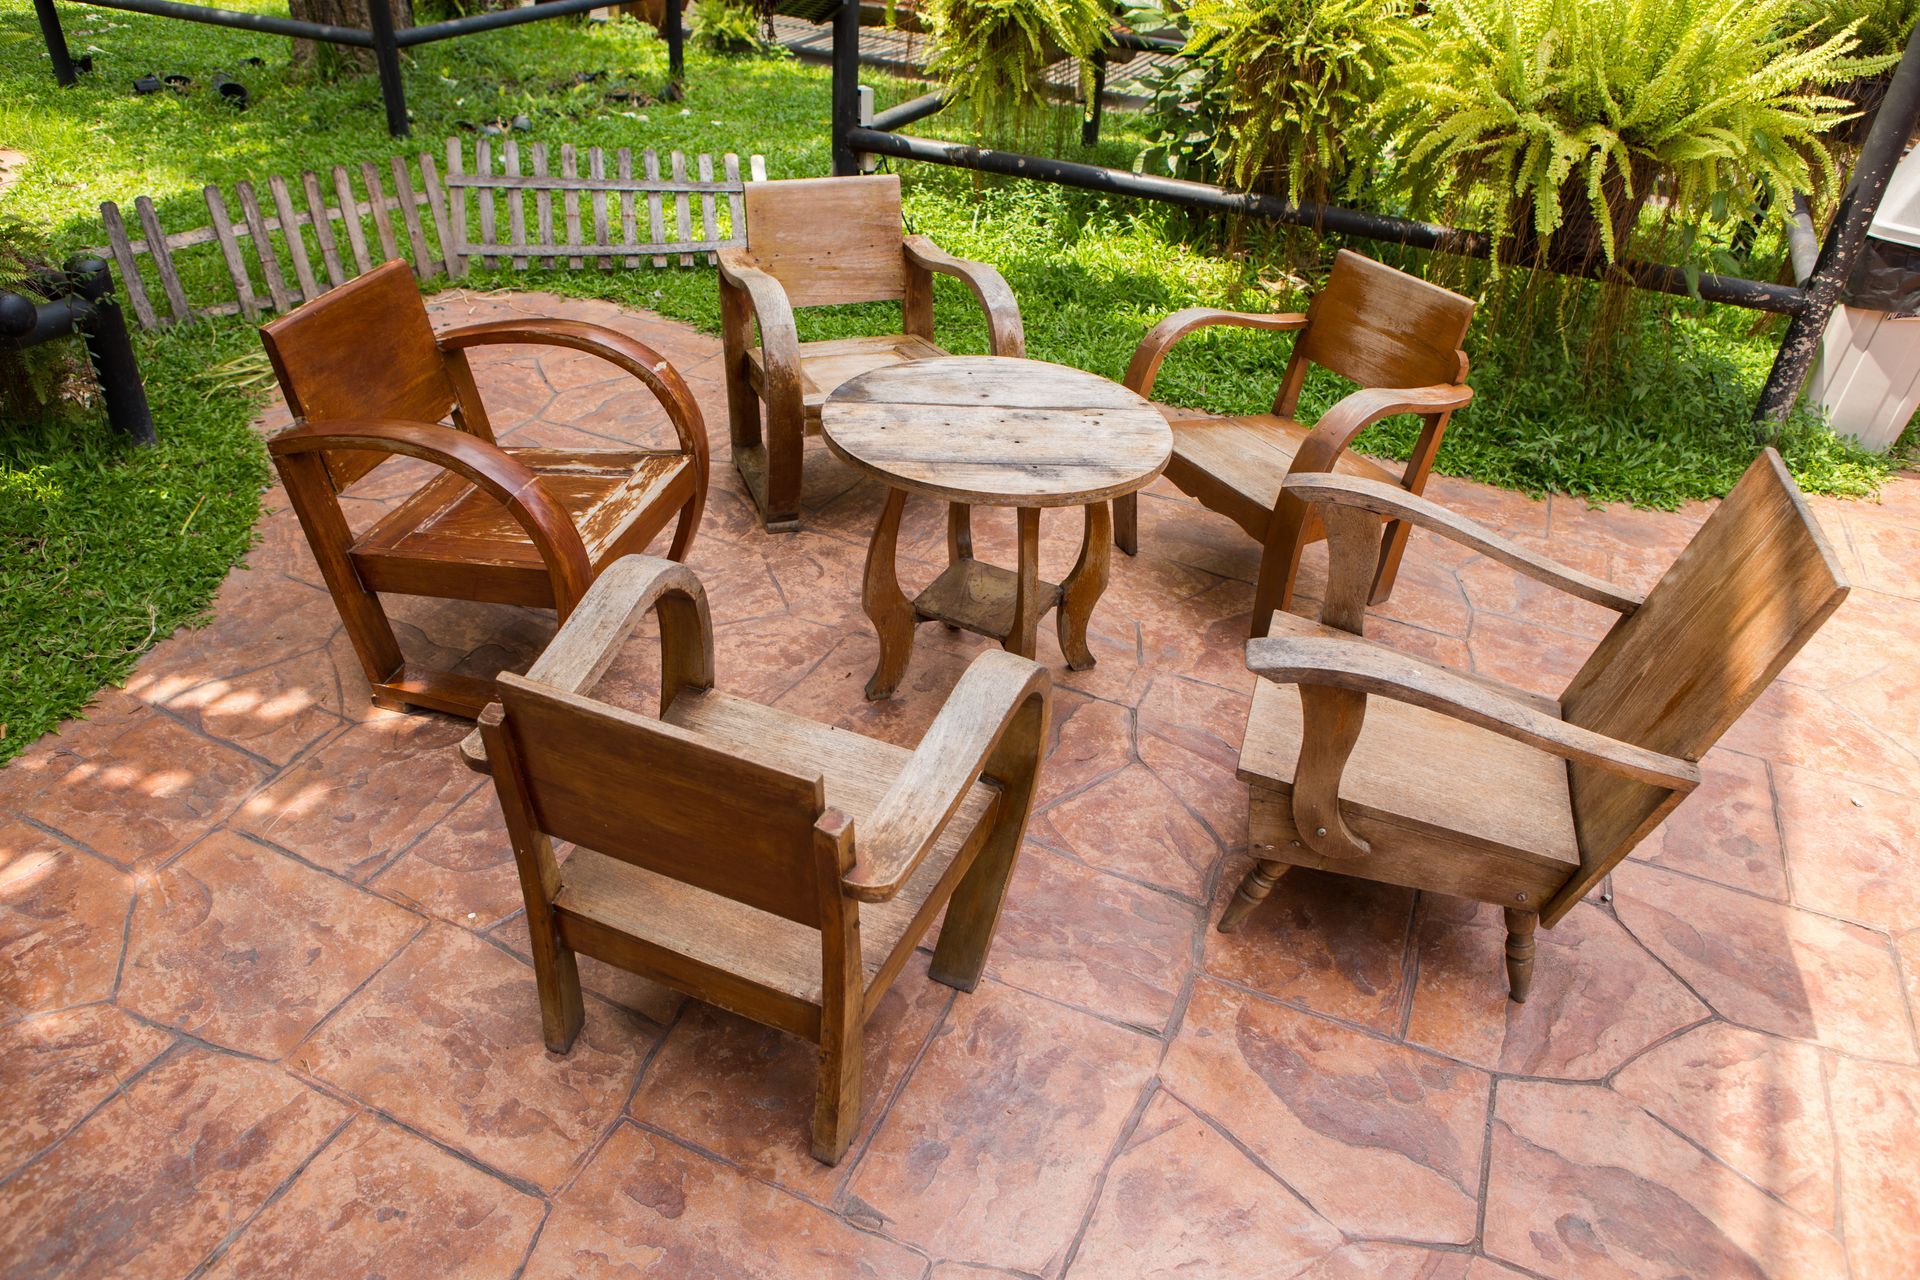 a dyed and stamped concrete patio with rustic wooden chairs and table.